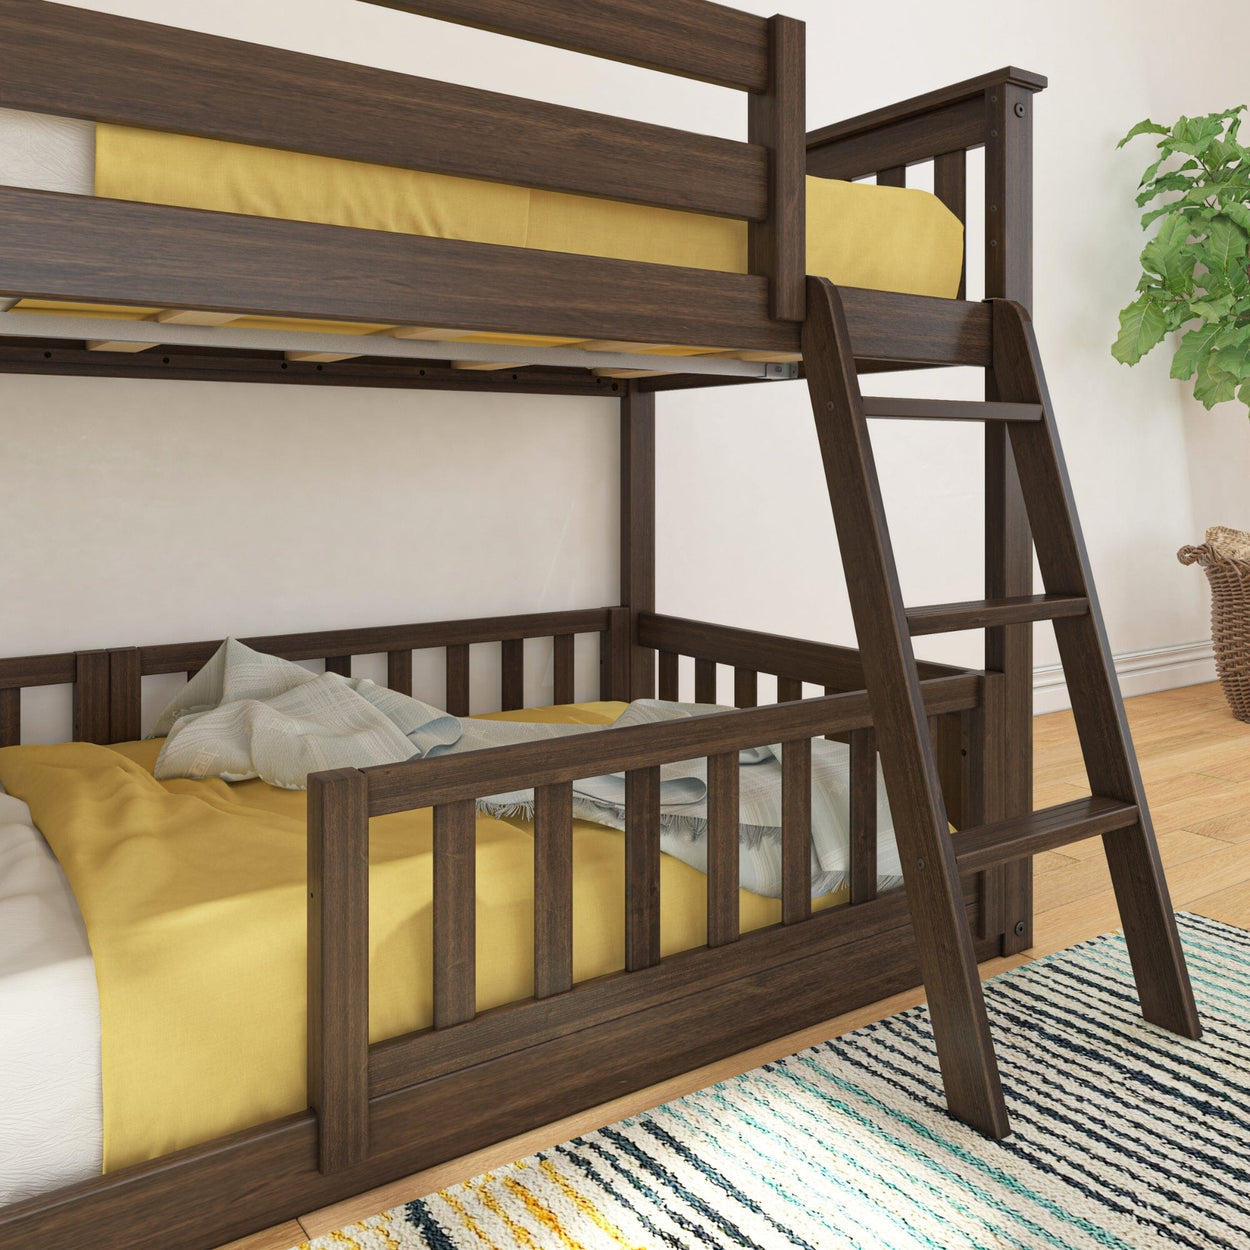 180214008309 : Bunk Beds Twin over Twin Low Bunk with Three Guard Rails, Walnut